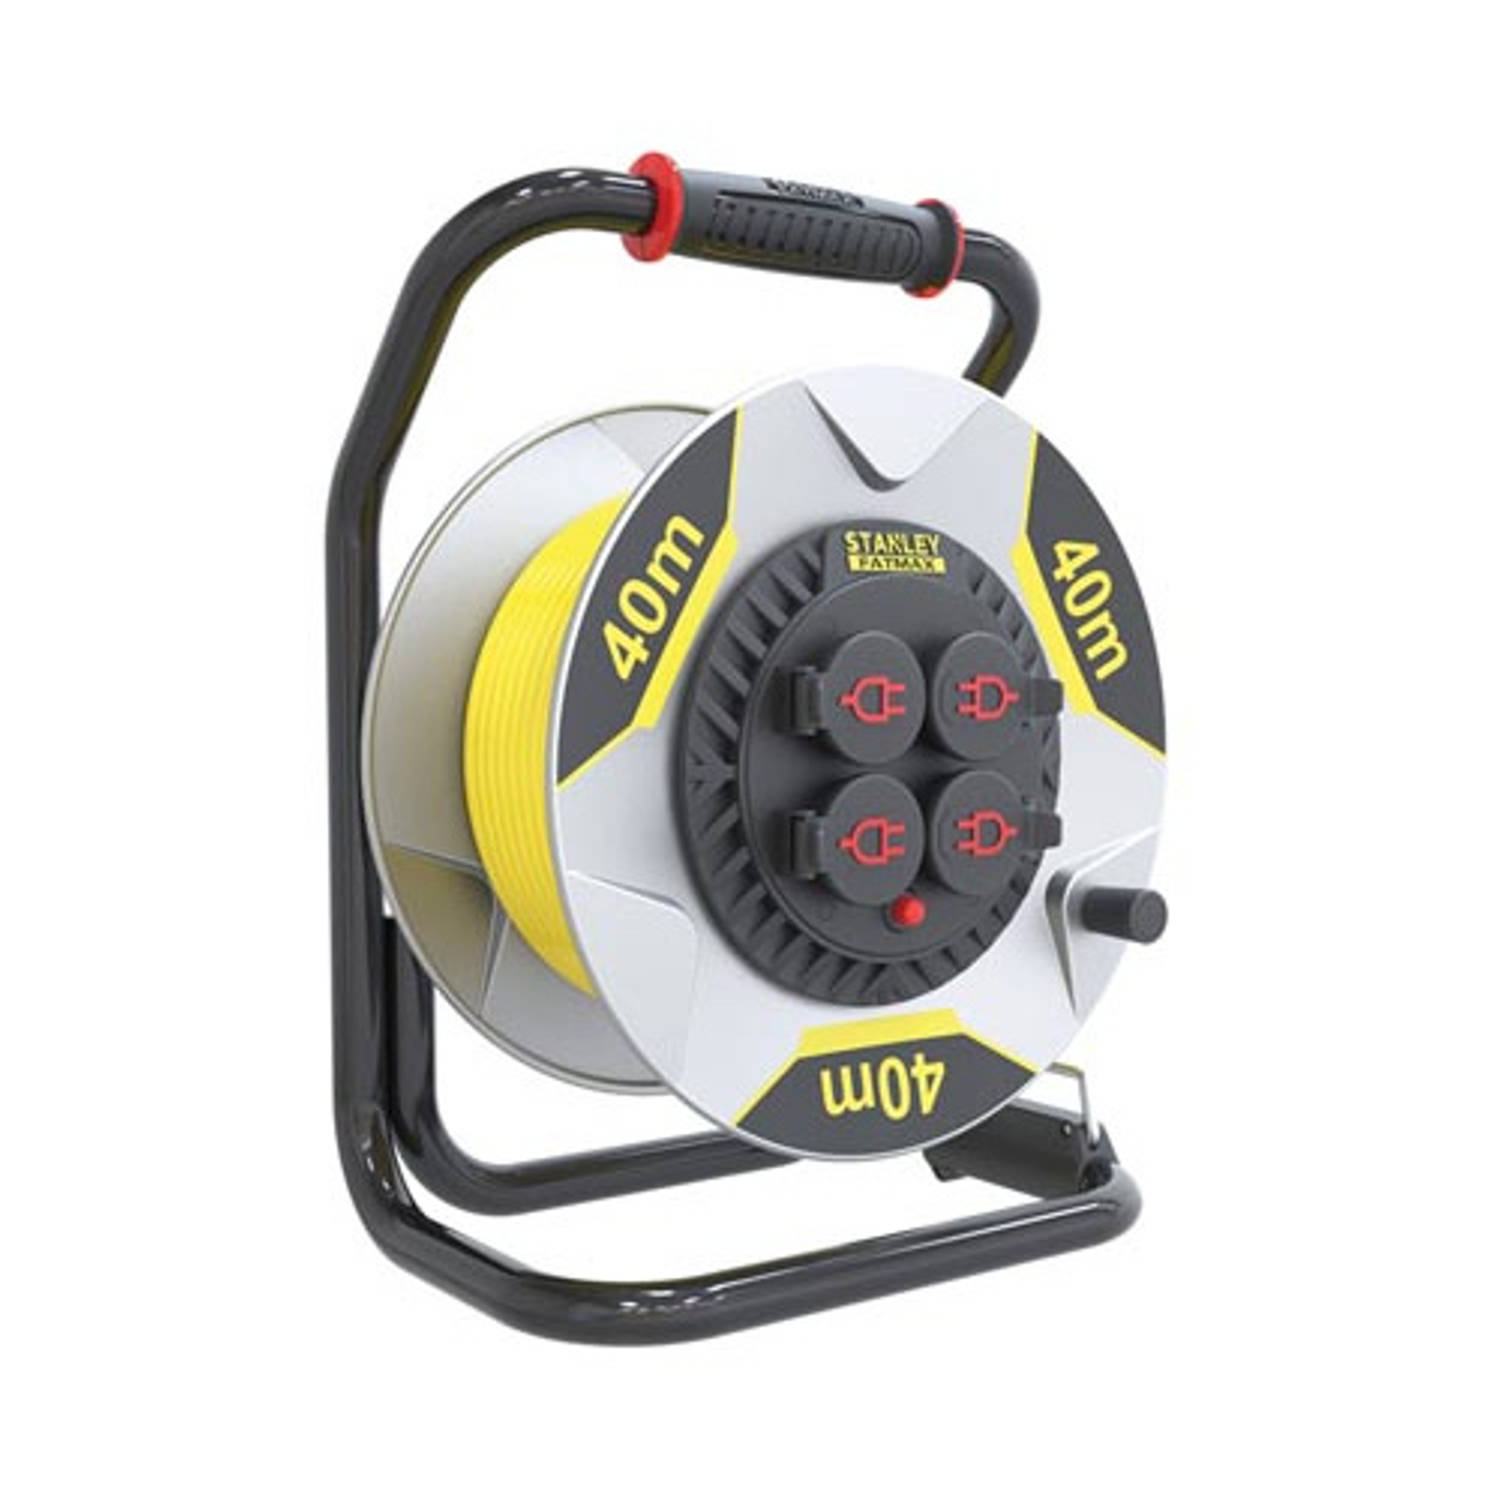 Stanley Fatmax Professional Neoprene Cable Reel With Anti-twist System 40 M 3g2.5 4 Sockets